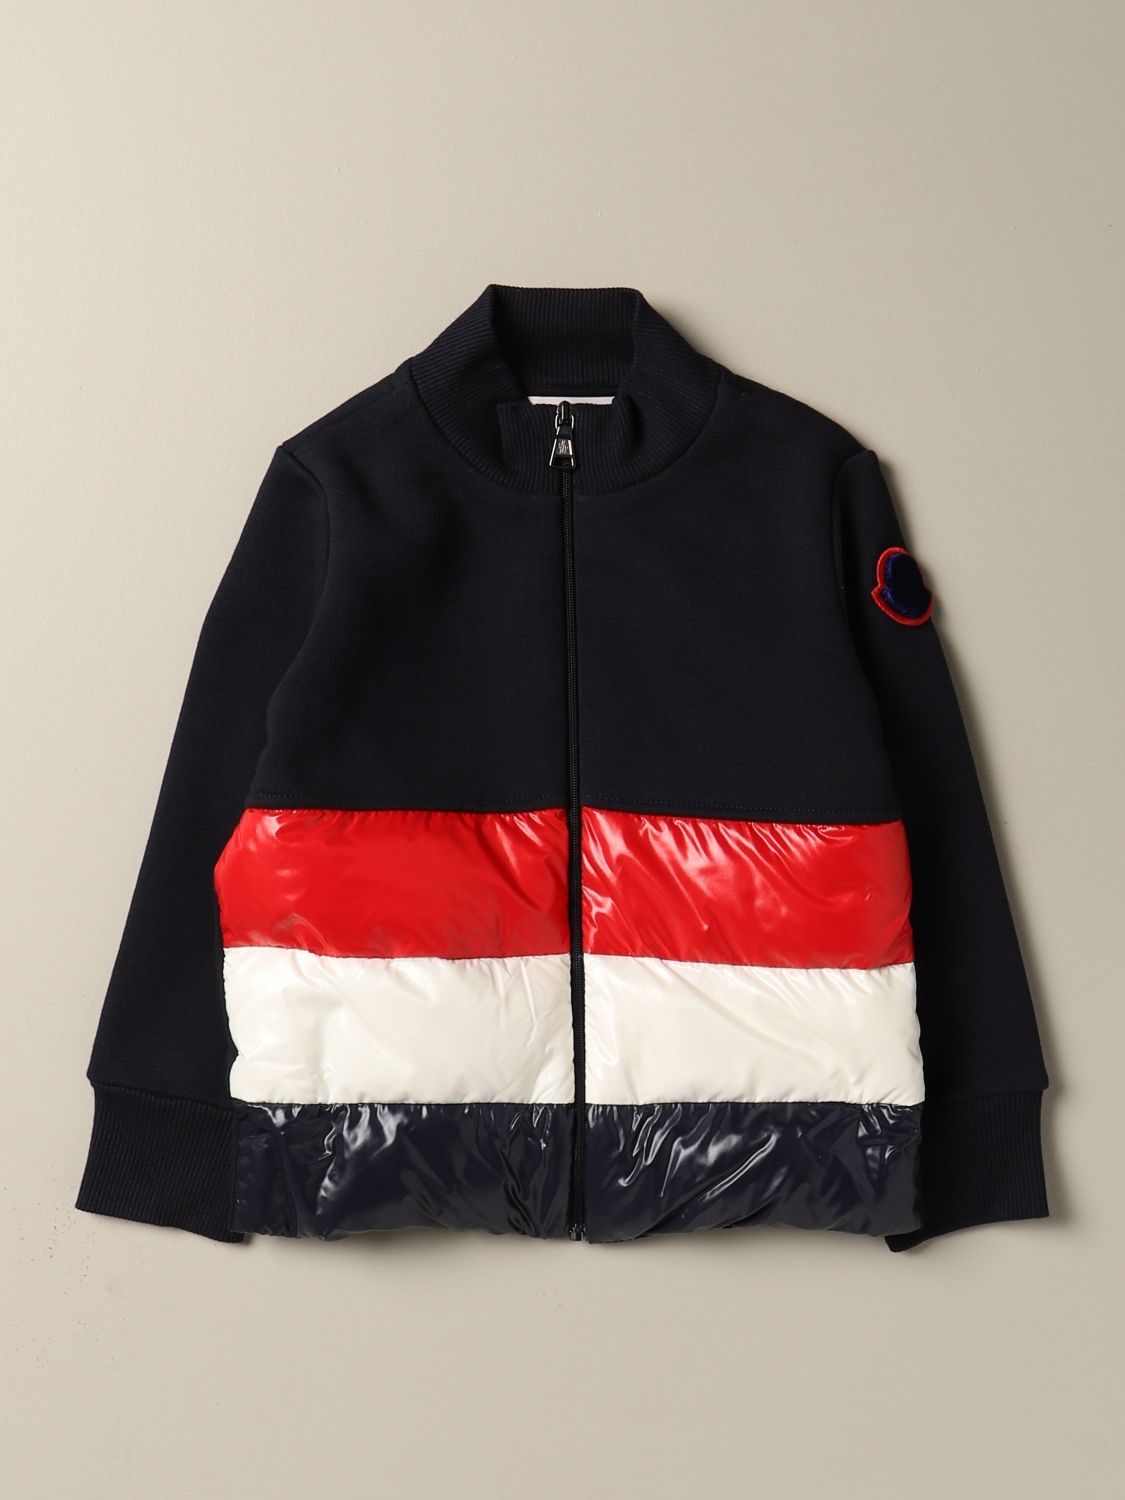 moncler sweater